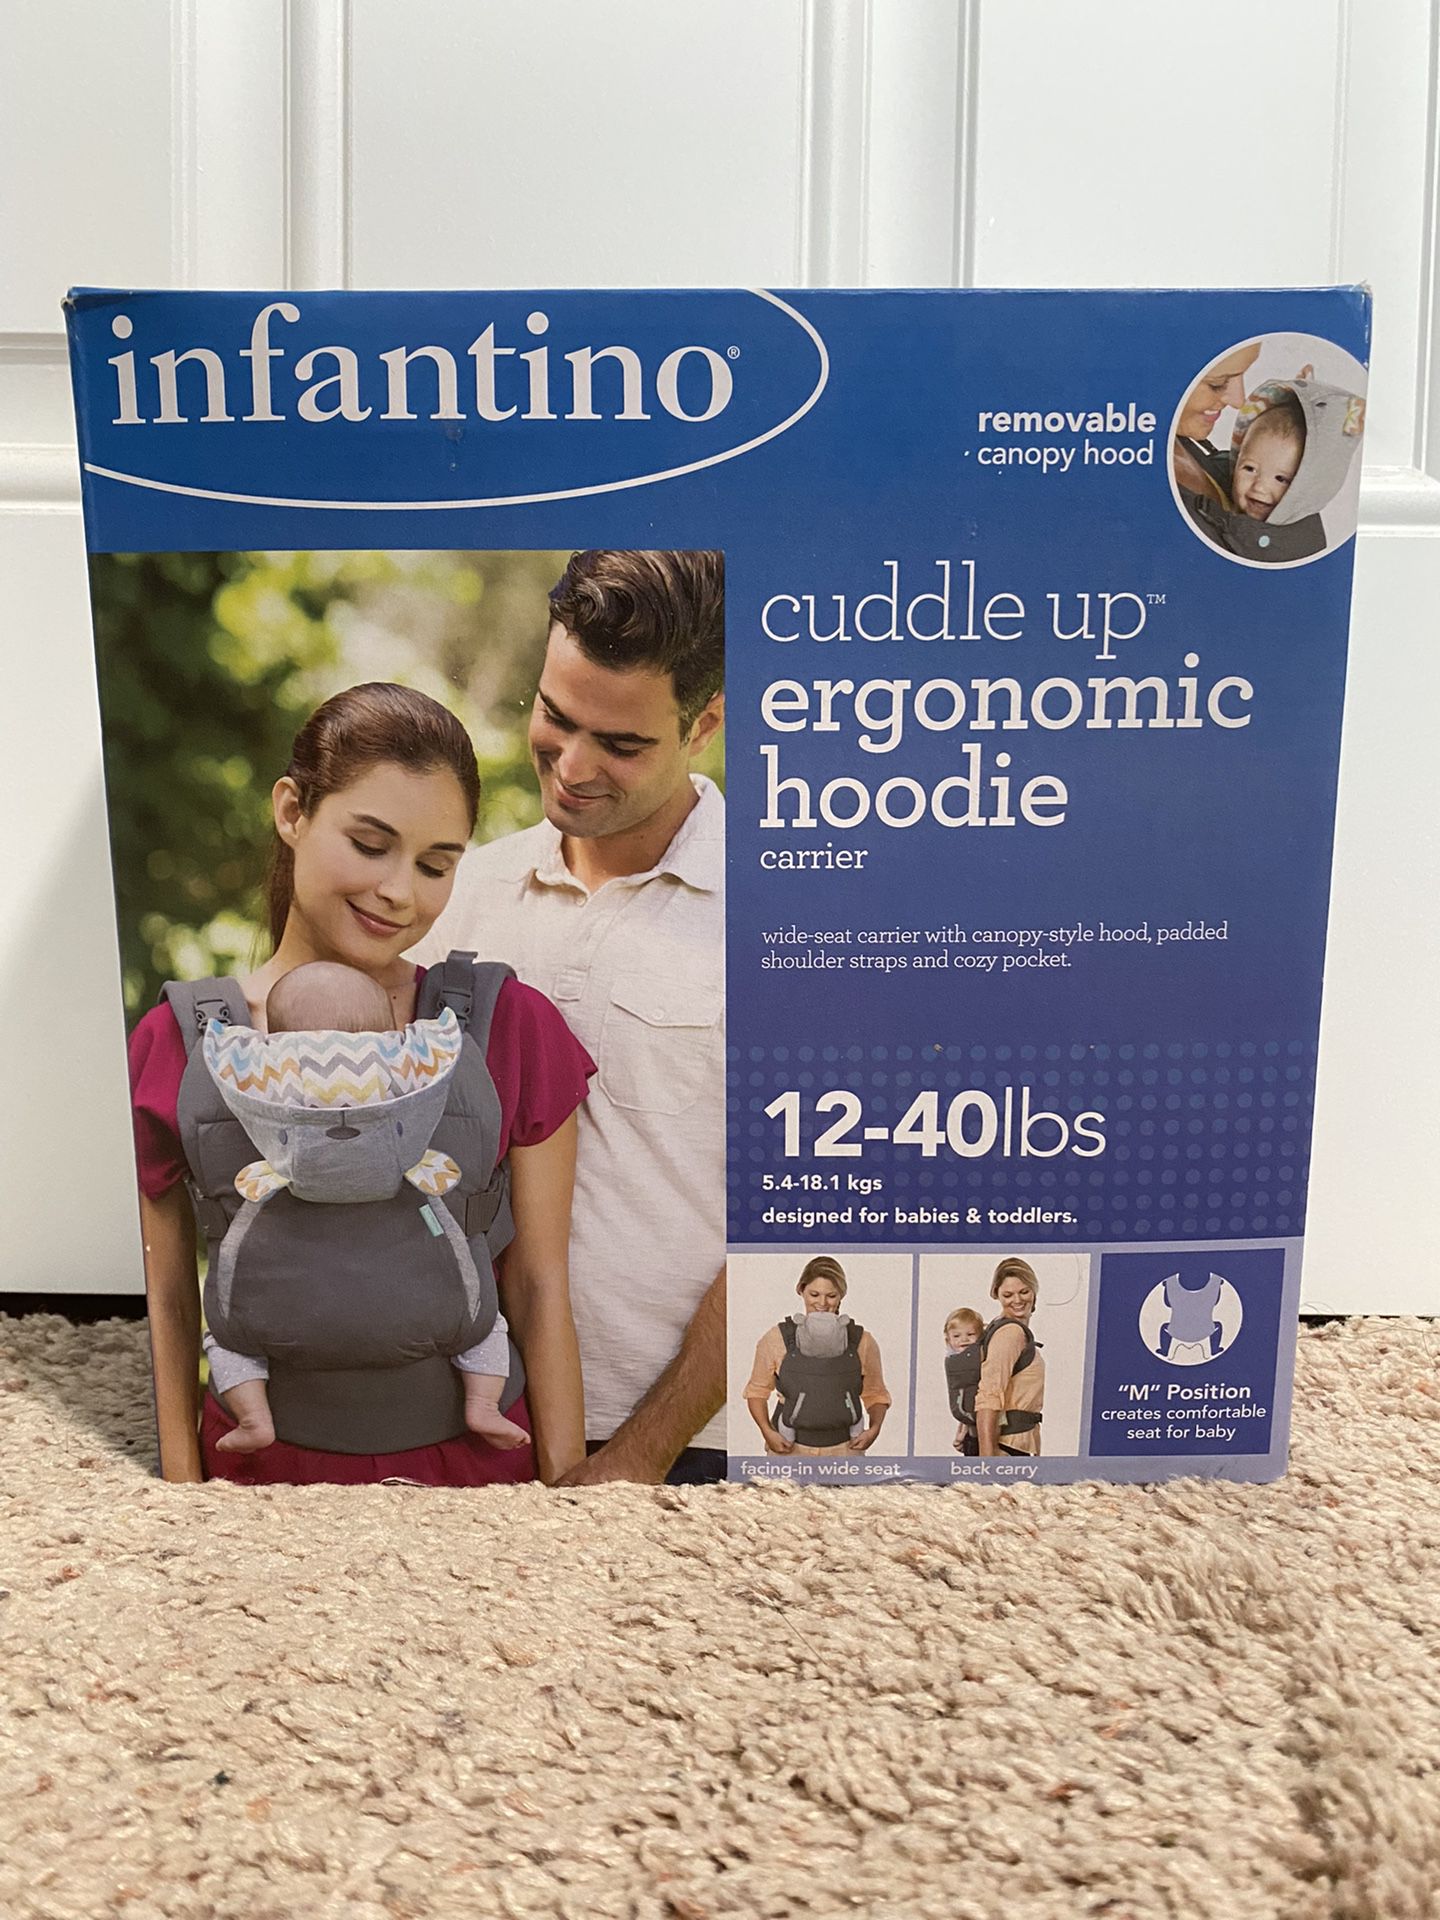 Infantino Cuddle Up Ergonomic Hoodie Baby Carrier BRAND NEW